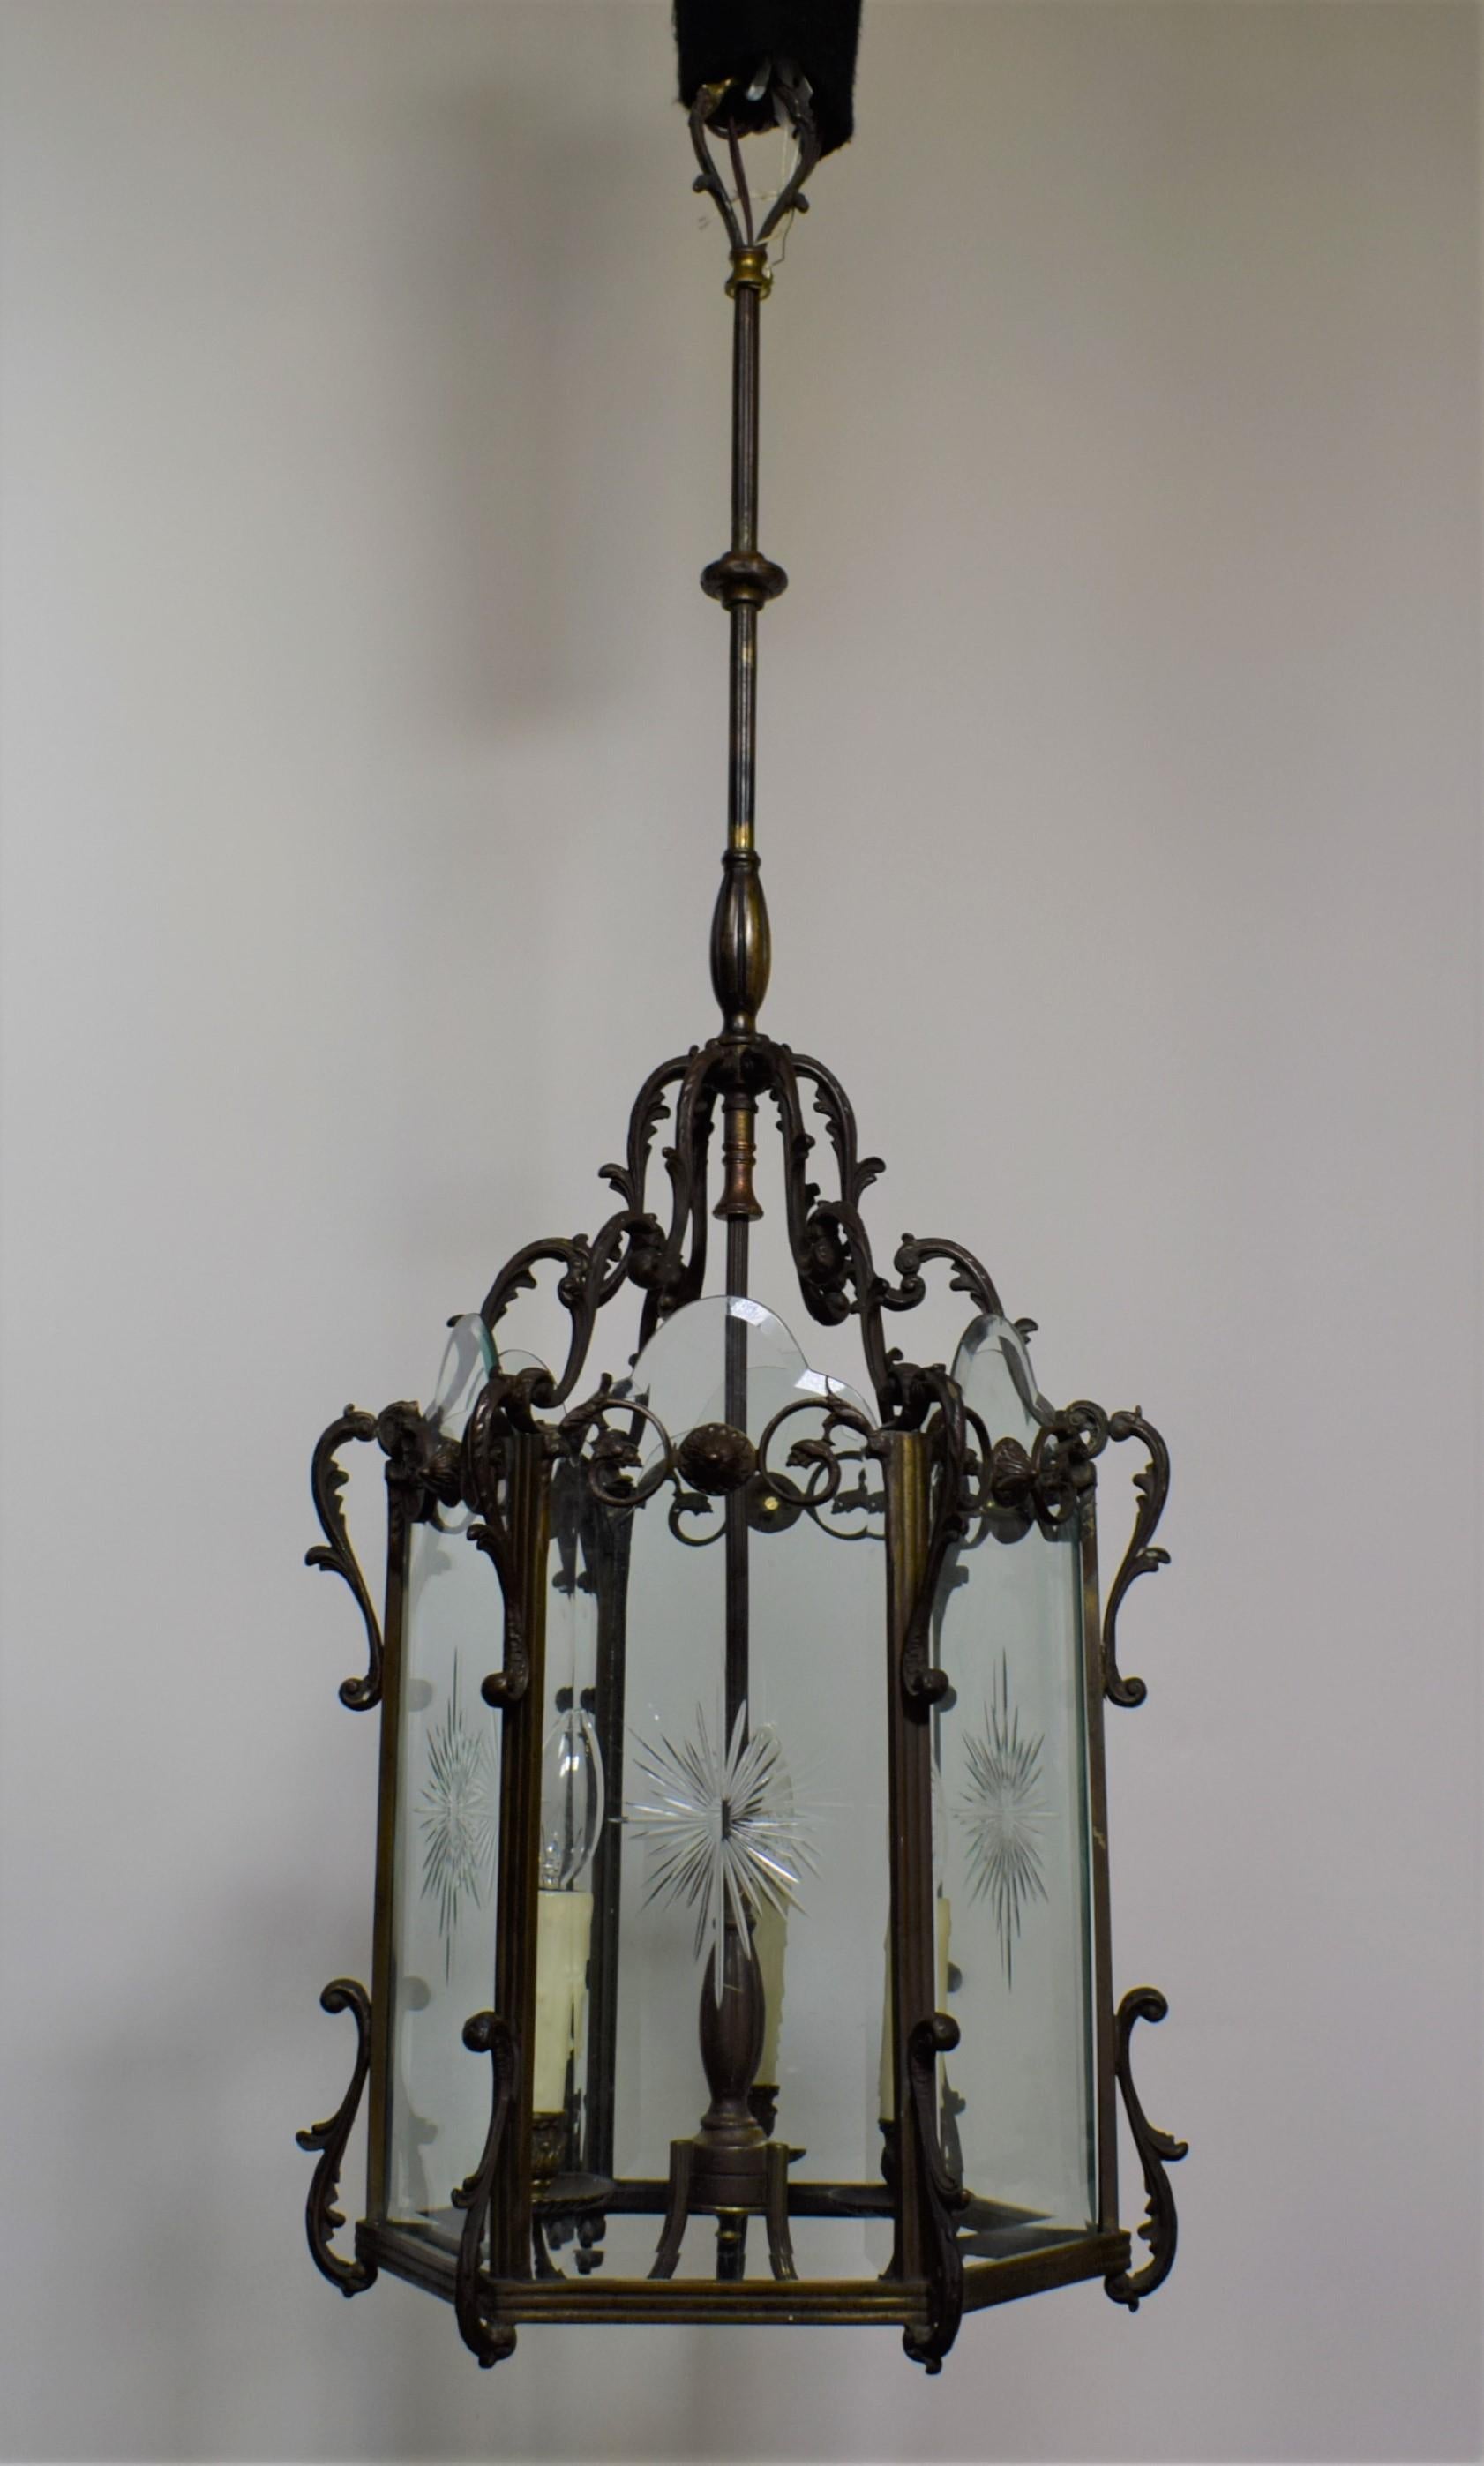 A very fine hexagonal bronze lantern with beveled and hand cut sunburst decorated panels. 3 lights.
France, circa 1920.
Dimensions: Overall height 40